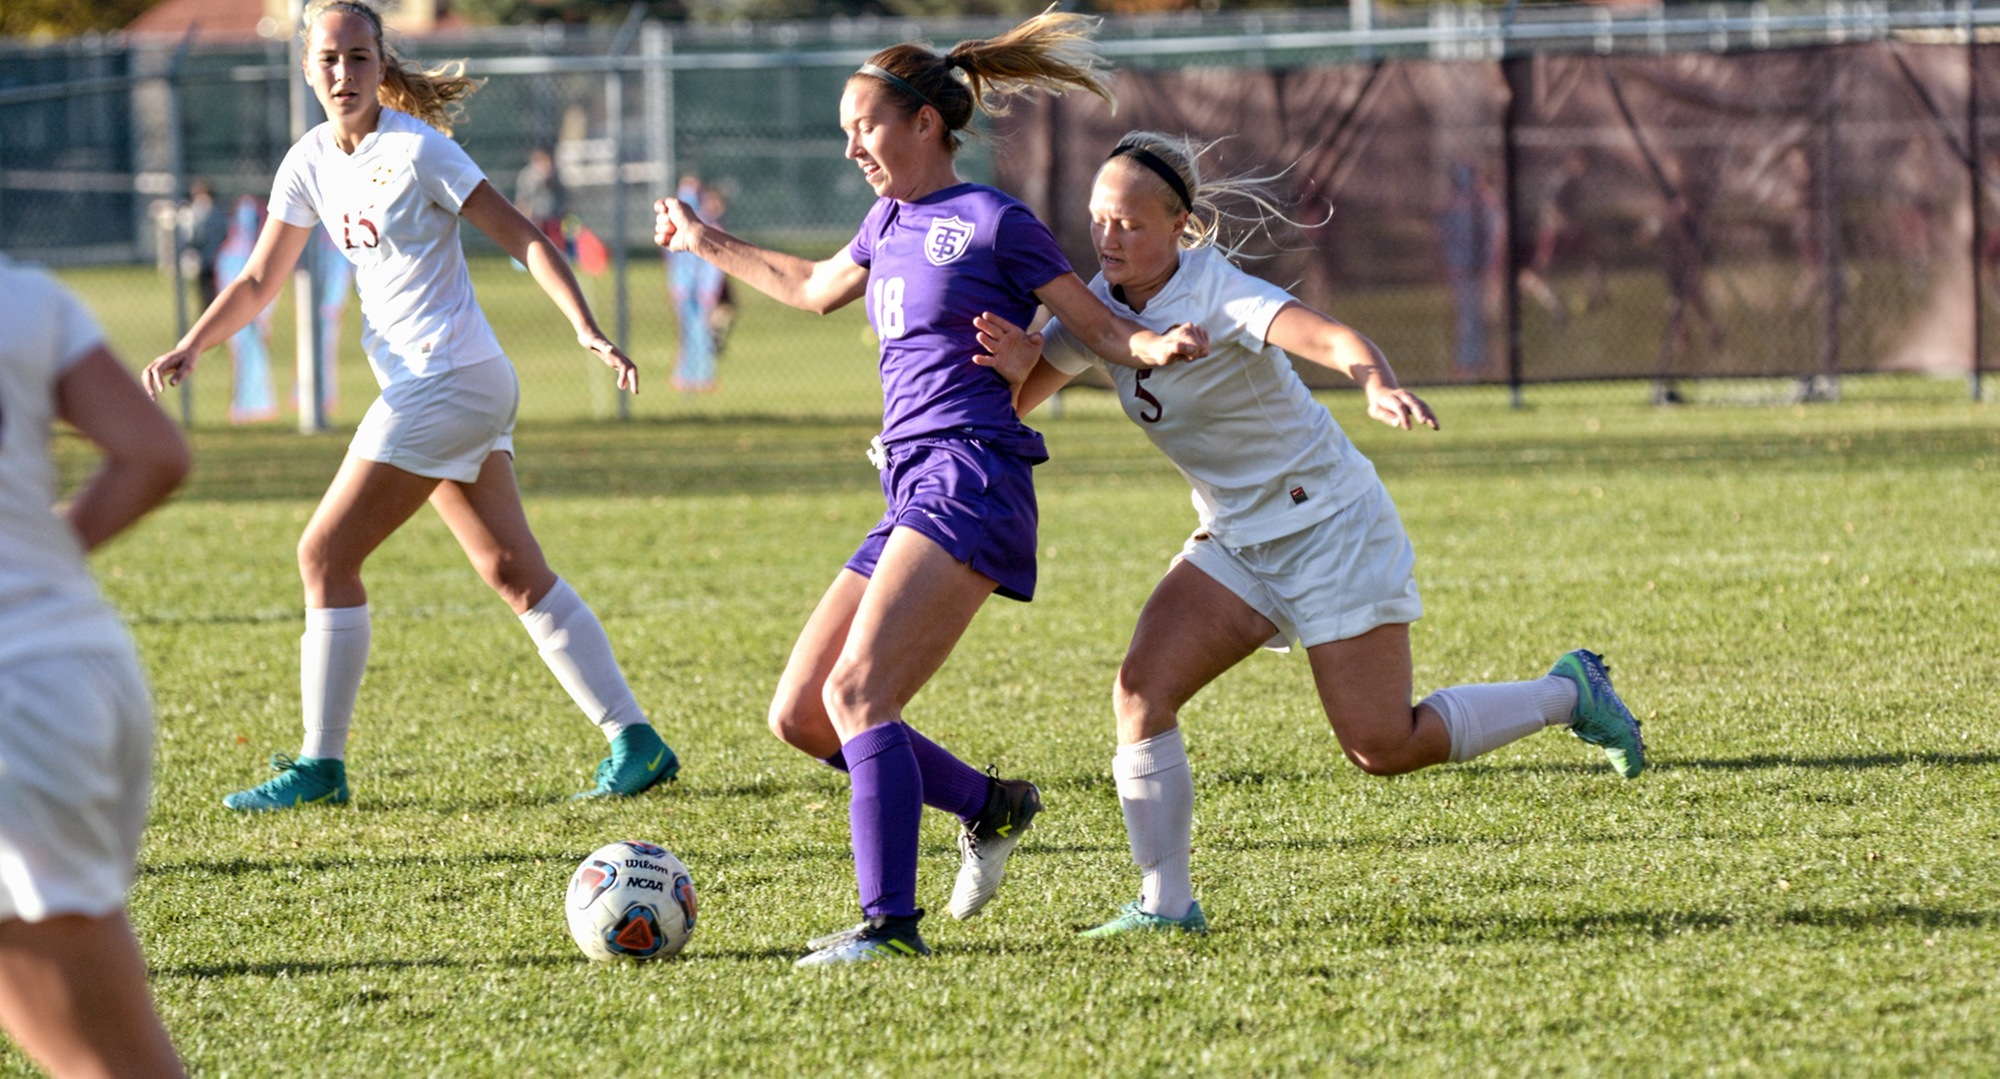 Defender Erin Eidsness tries to step up and win the ball during the Cobbers' game with regionally-ranked St. Thomas.